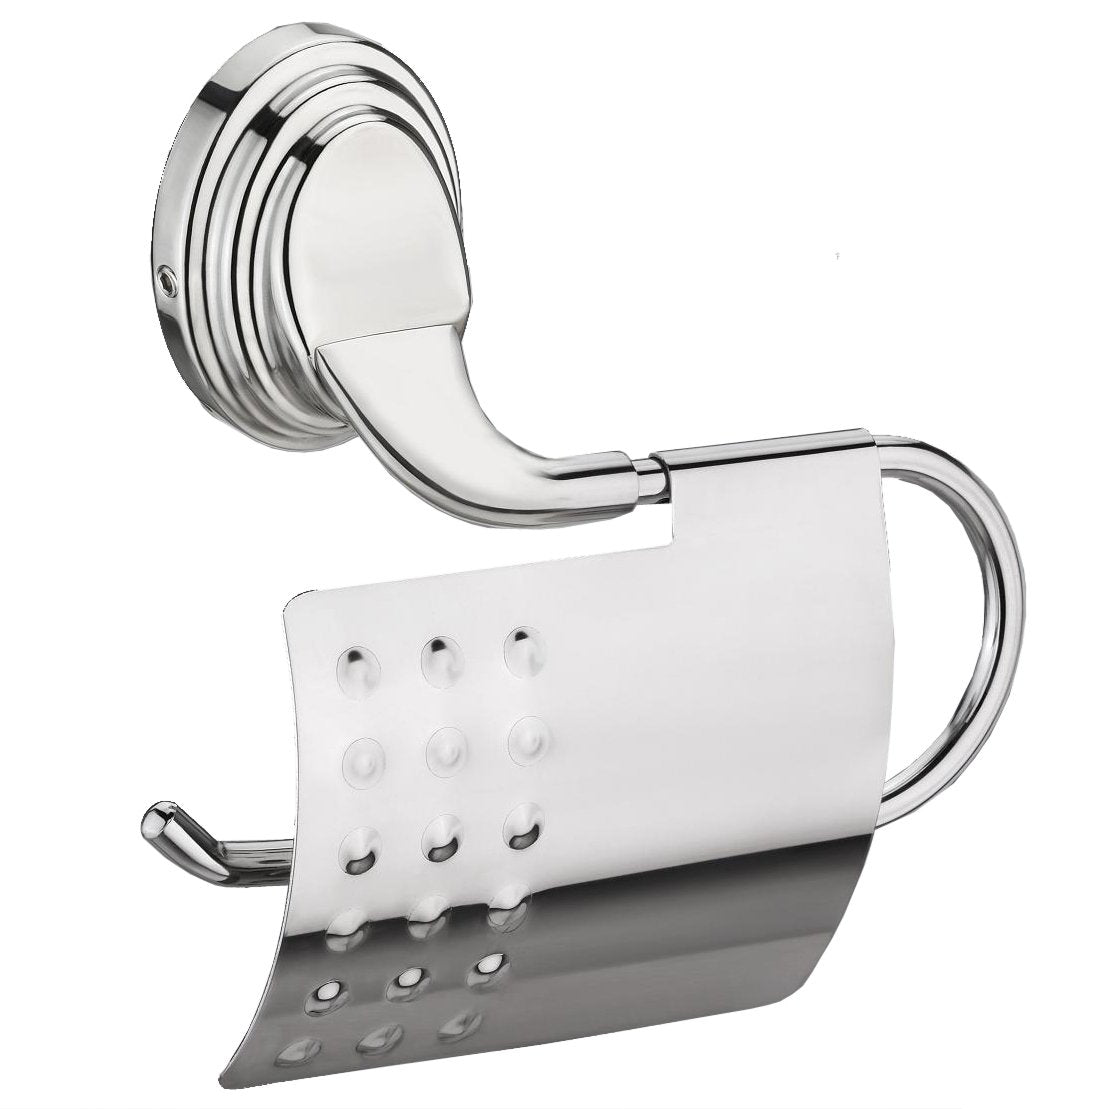 Plantex Cubic Stainless Steel 304 Grade Toilet Paper Roll Holder/Toilet Paper Holder in Bathroom/Kitchen/Bathroom Accessories (Chrome)